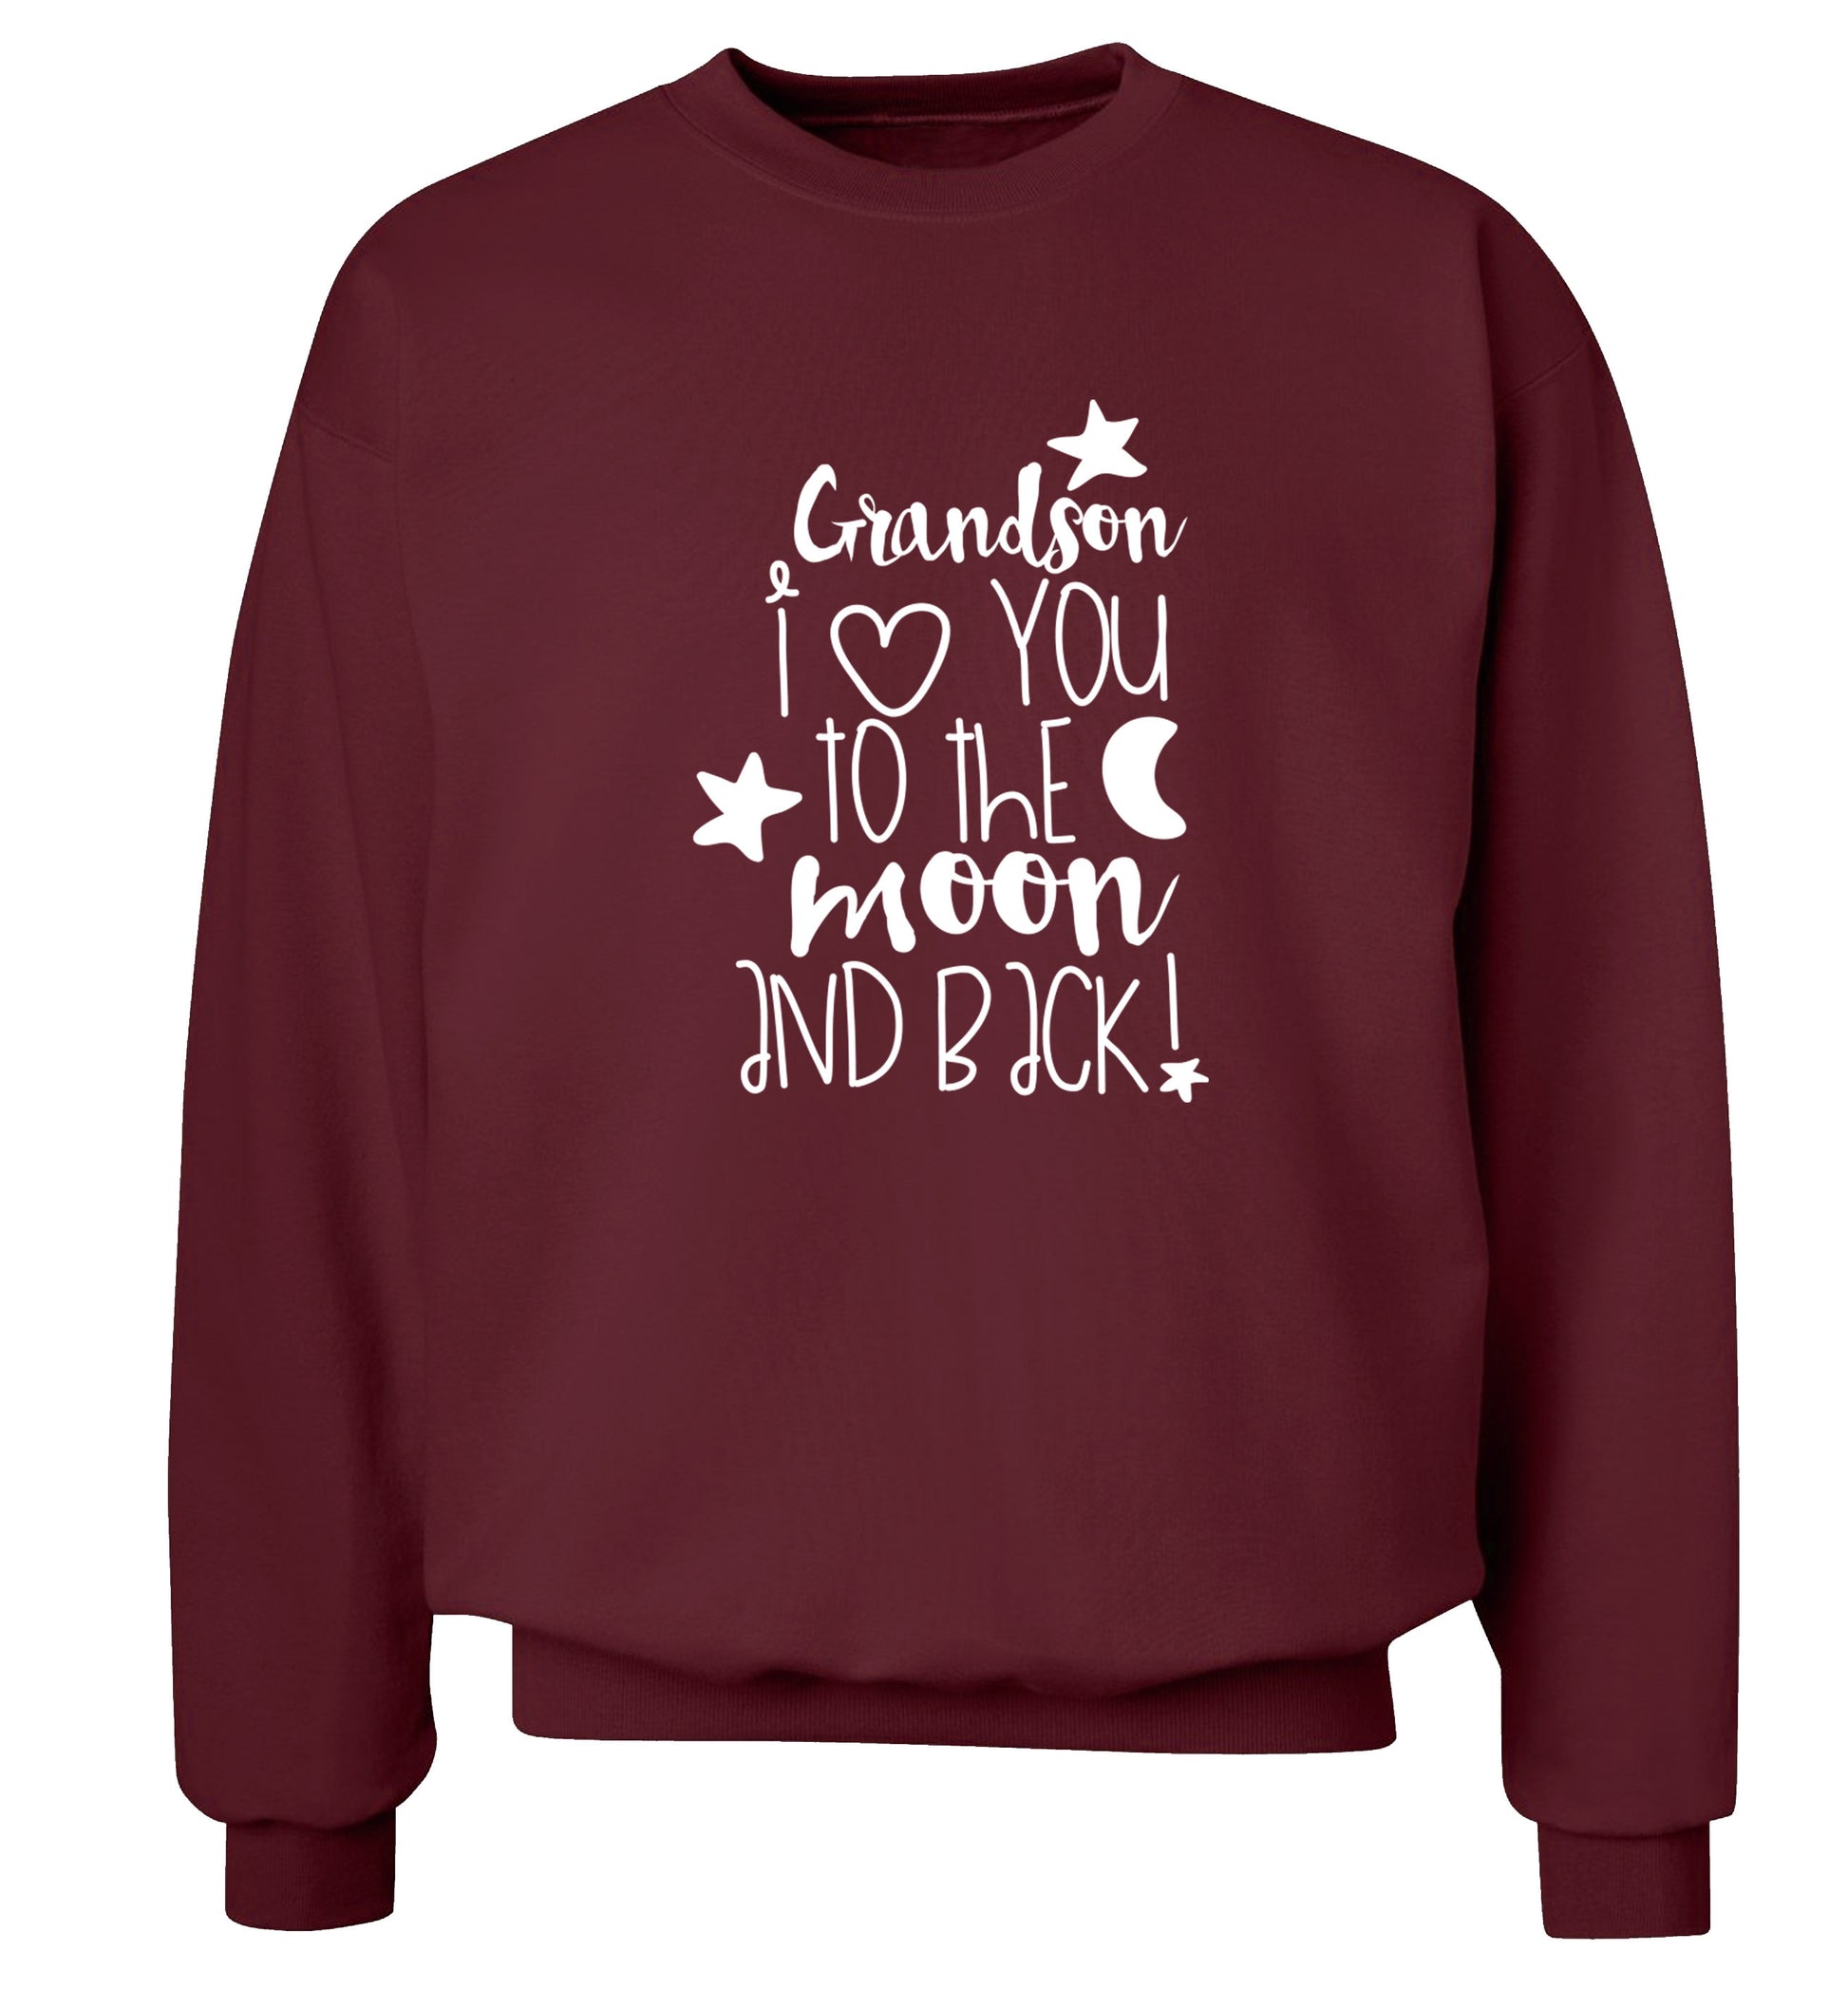 Grandson I love you to the moon and back Adult's unisex maroon  sweater 2XL